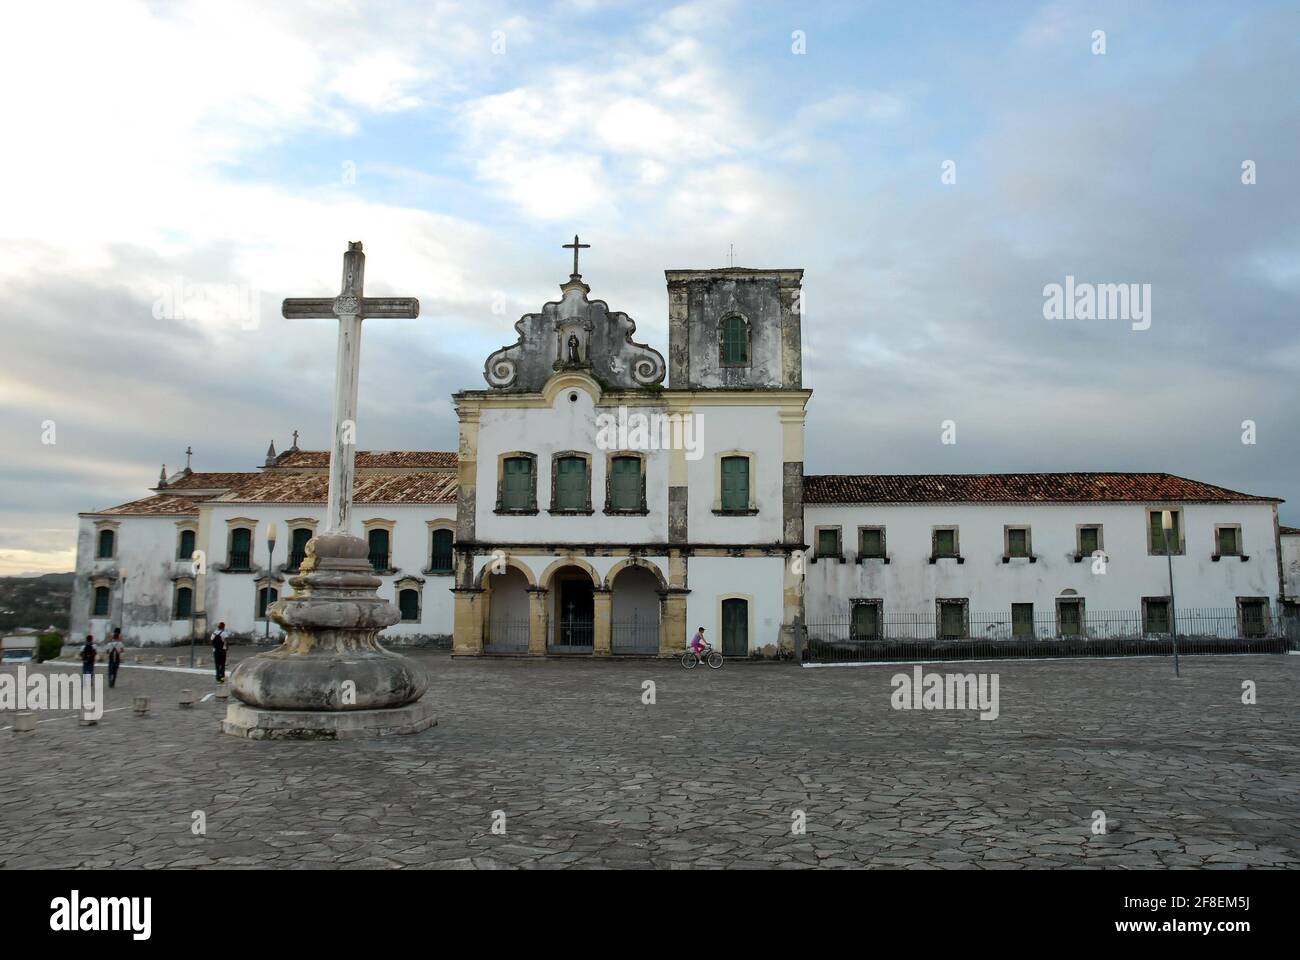 São Cristovão, Aracaju, Brazil, July 22, 2015. Church and convent of San Francisco, located in the municipality of São Cristovão in the city of Aracaj Stock Photo